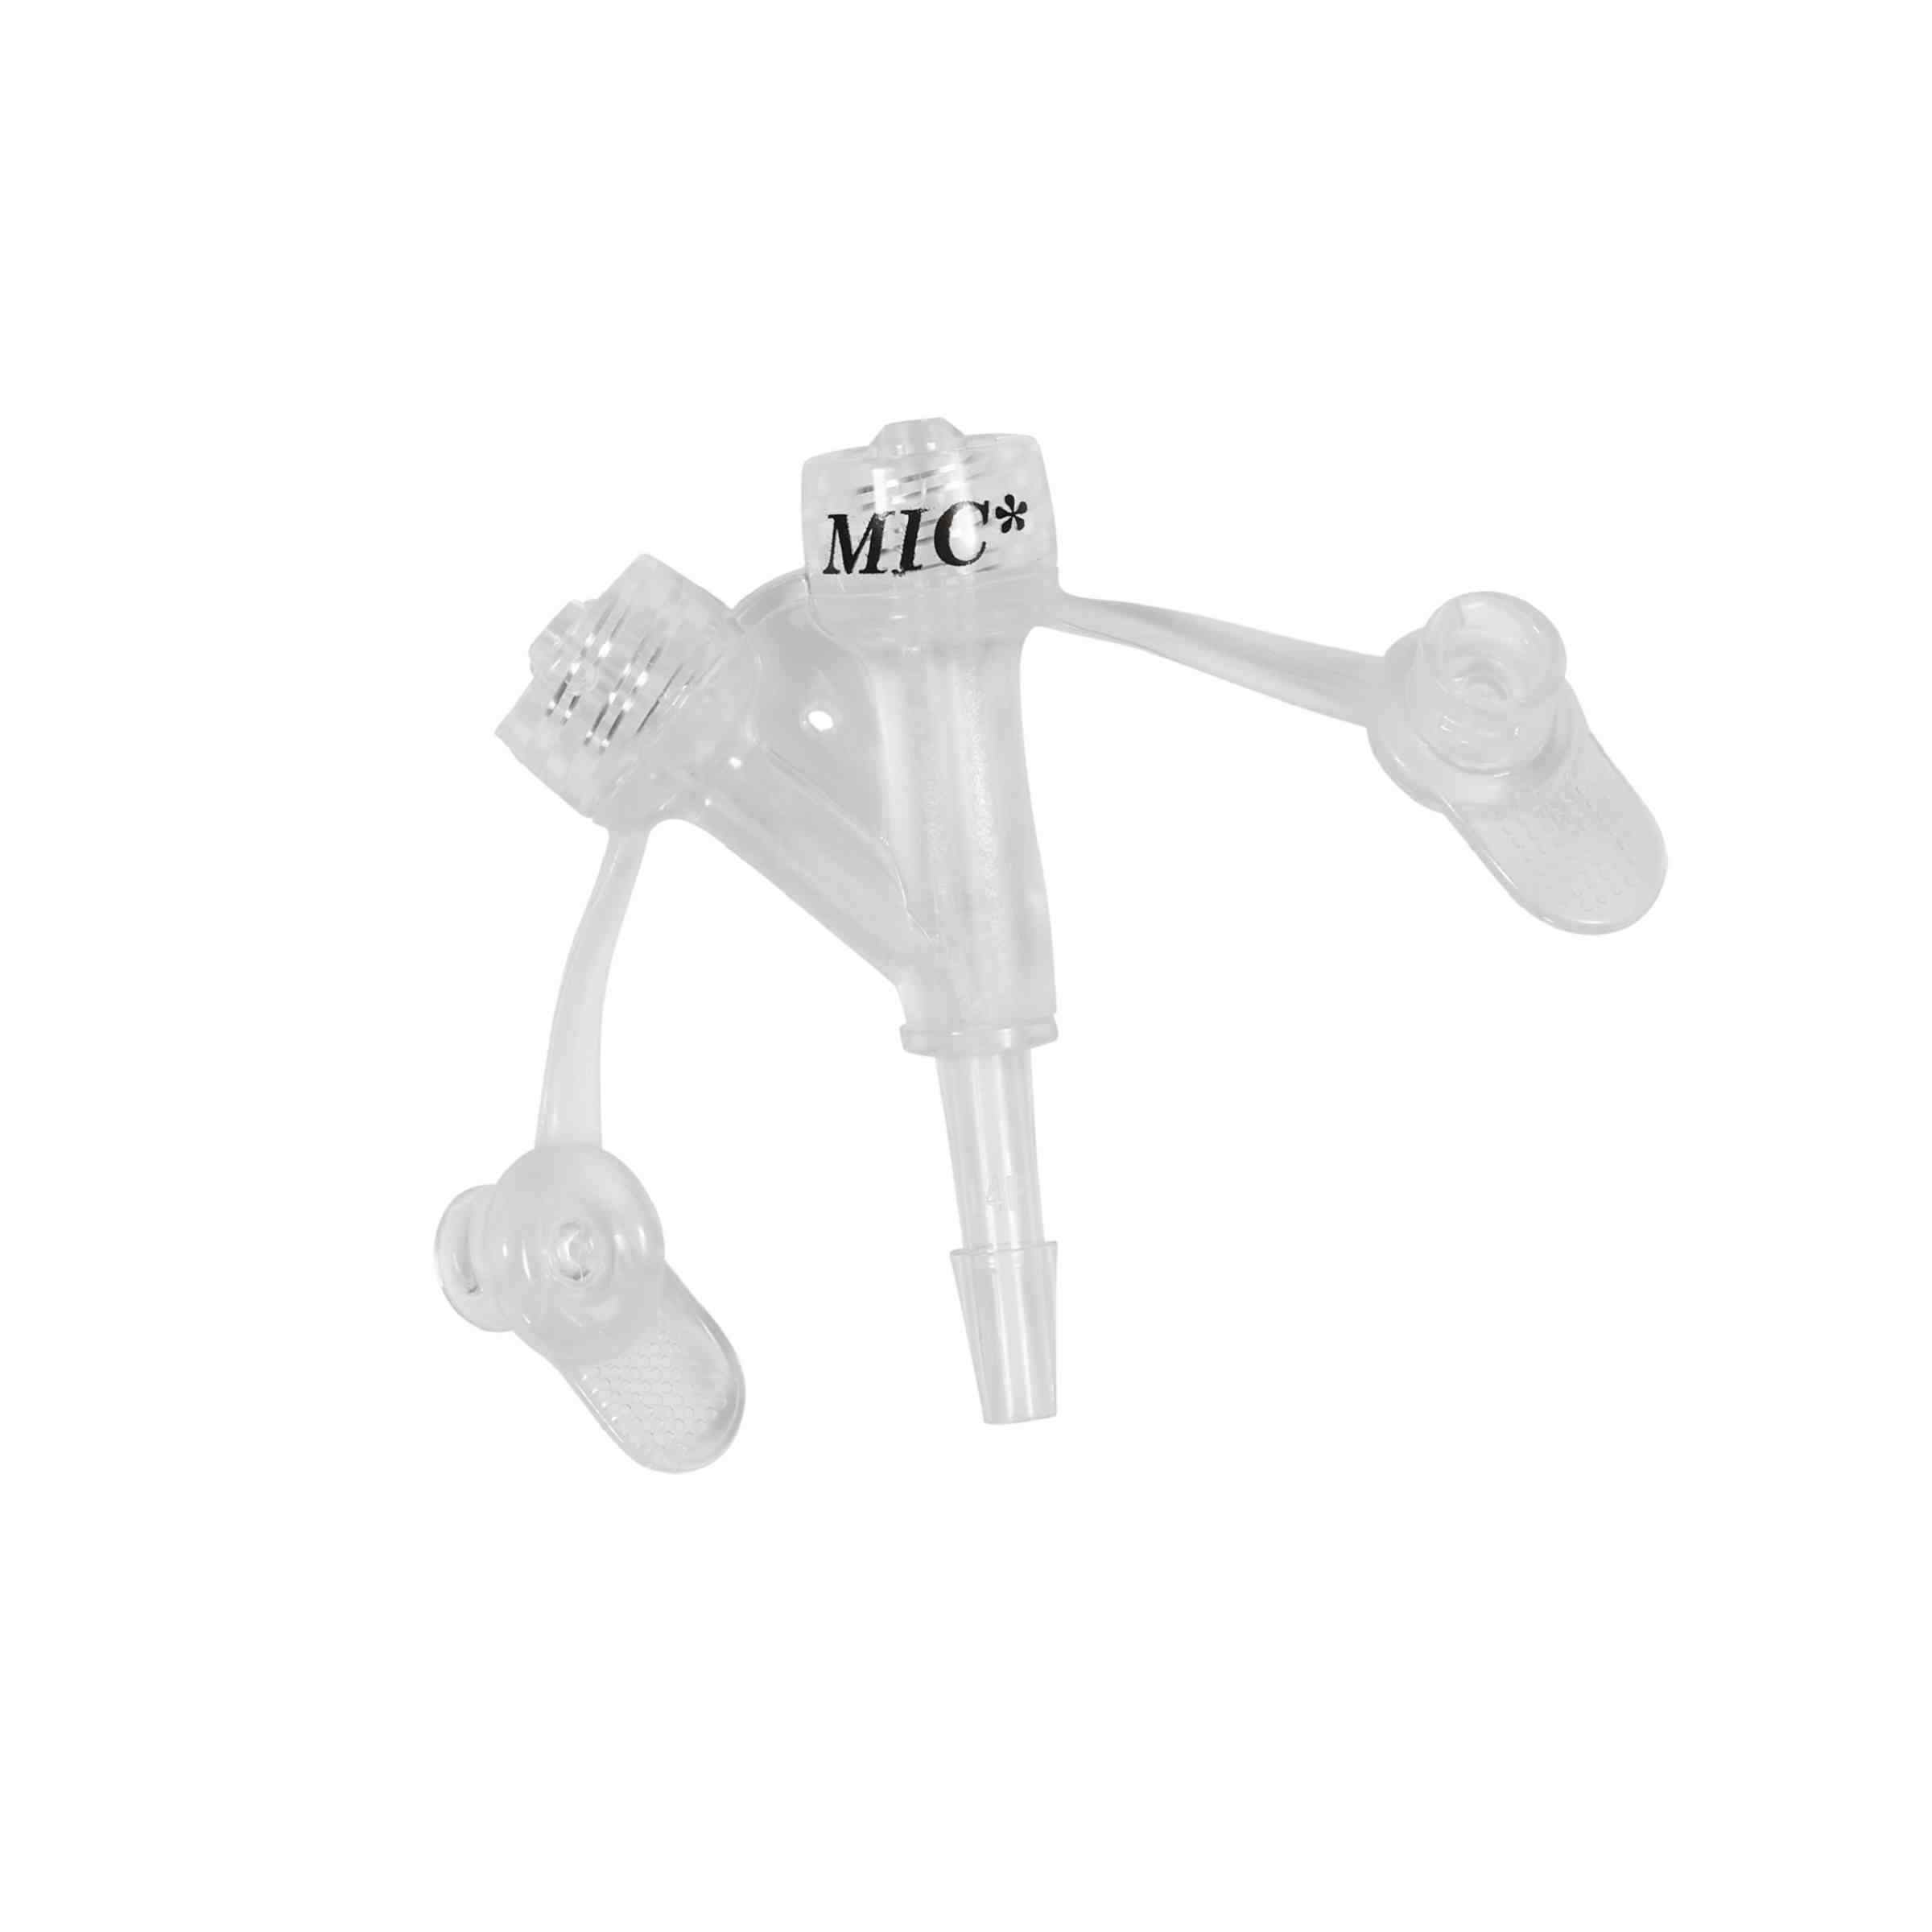 MIC PEG Replacement Feeding Adapter with ENFit Connectors, 8135-24, 24 Fr - 1 Each 